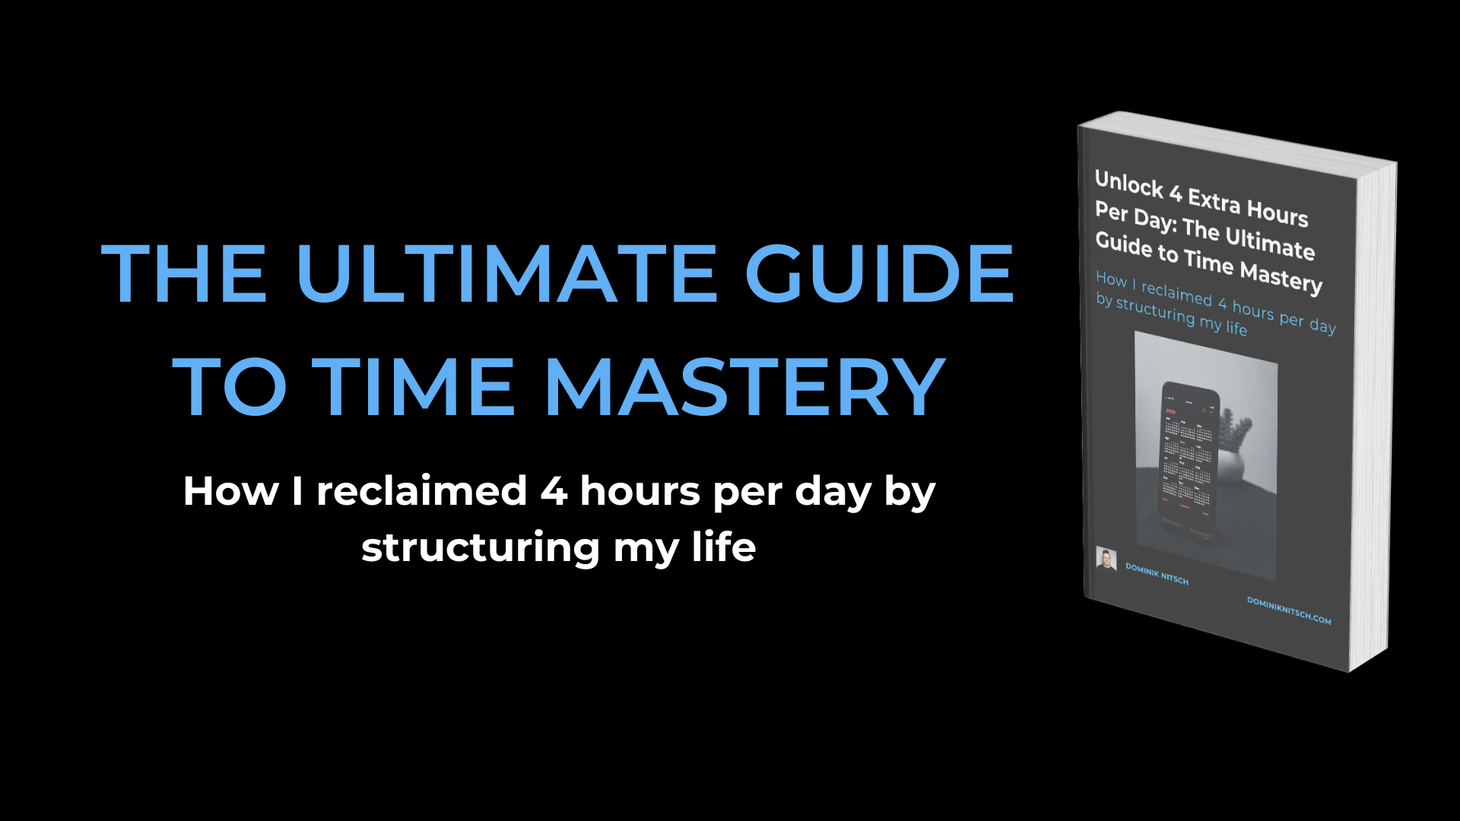 Unlock 4 Extra Hours Per Day: The Ultimate Guide to Time Mastery